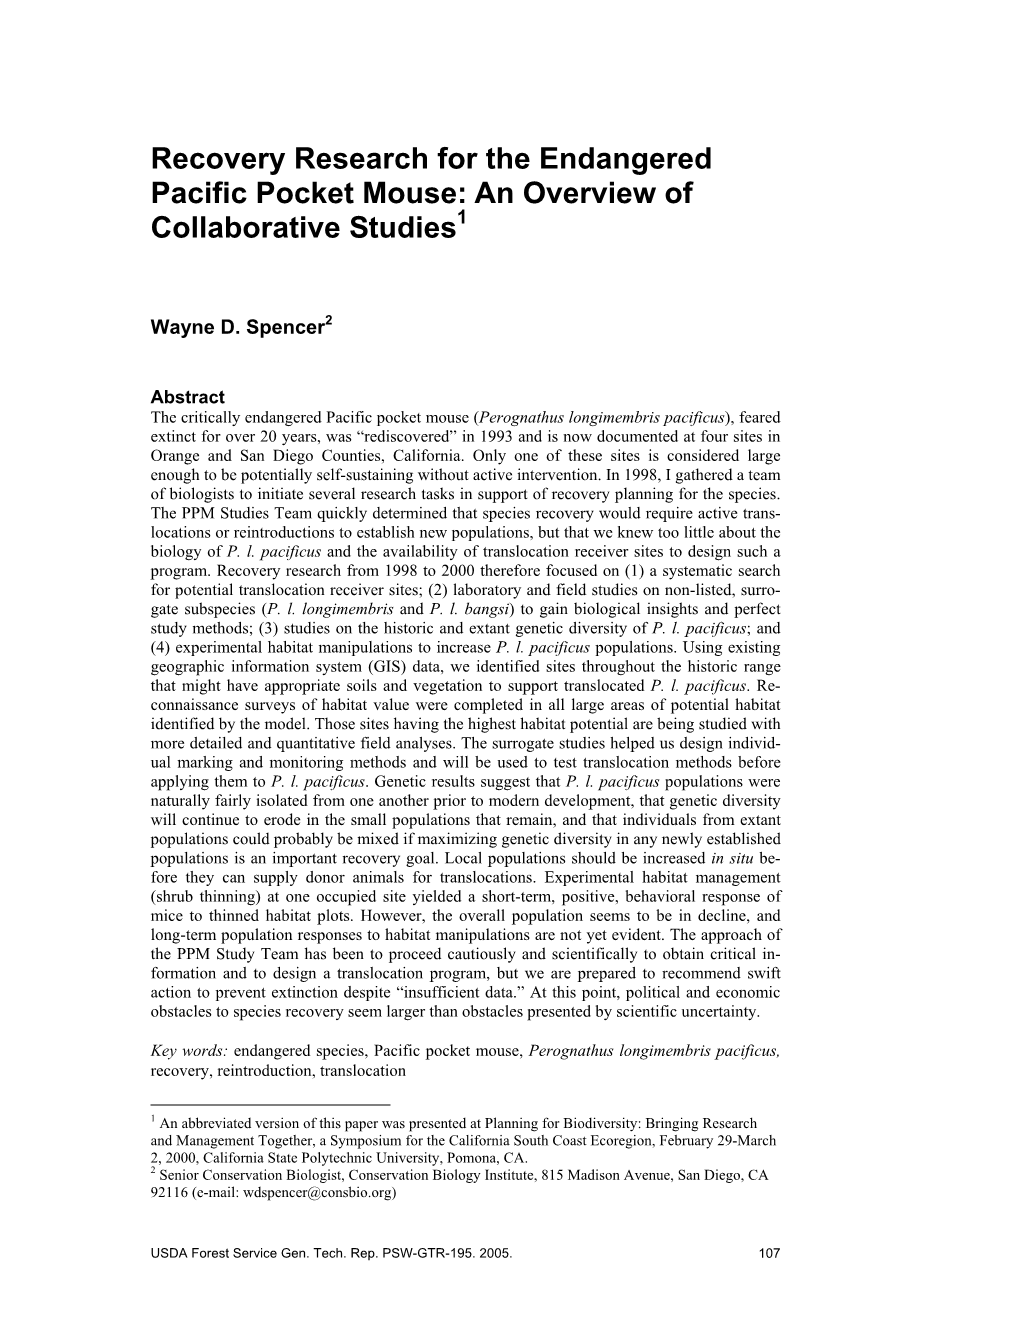 Recovery Research for the Endangered Pacific Pocket Mouse: an Overview of Collaborative Studies1